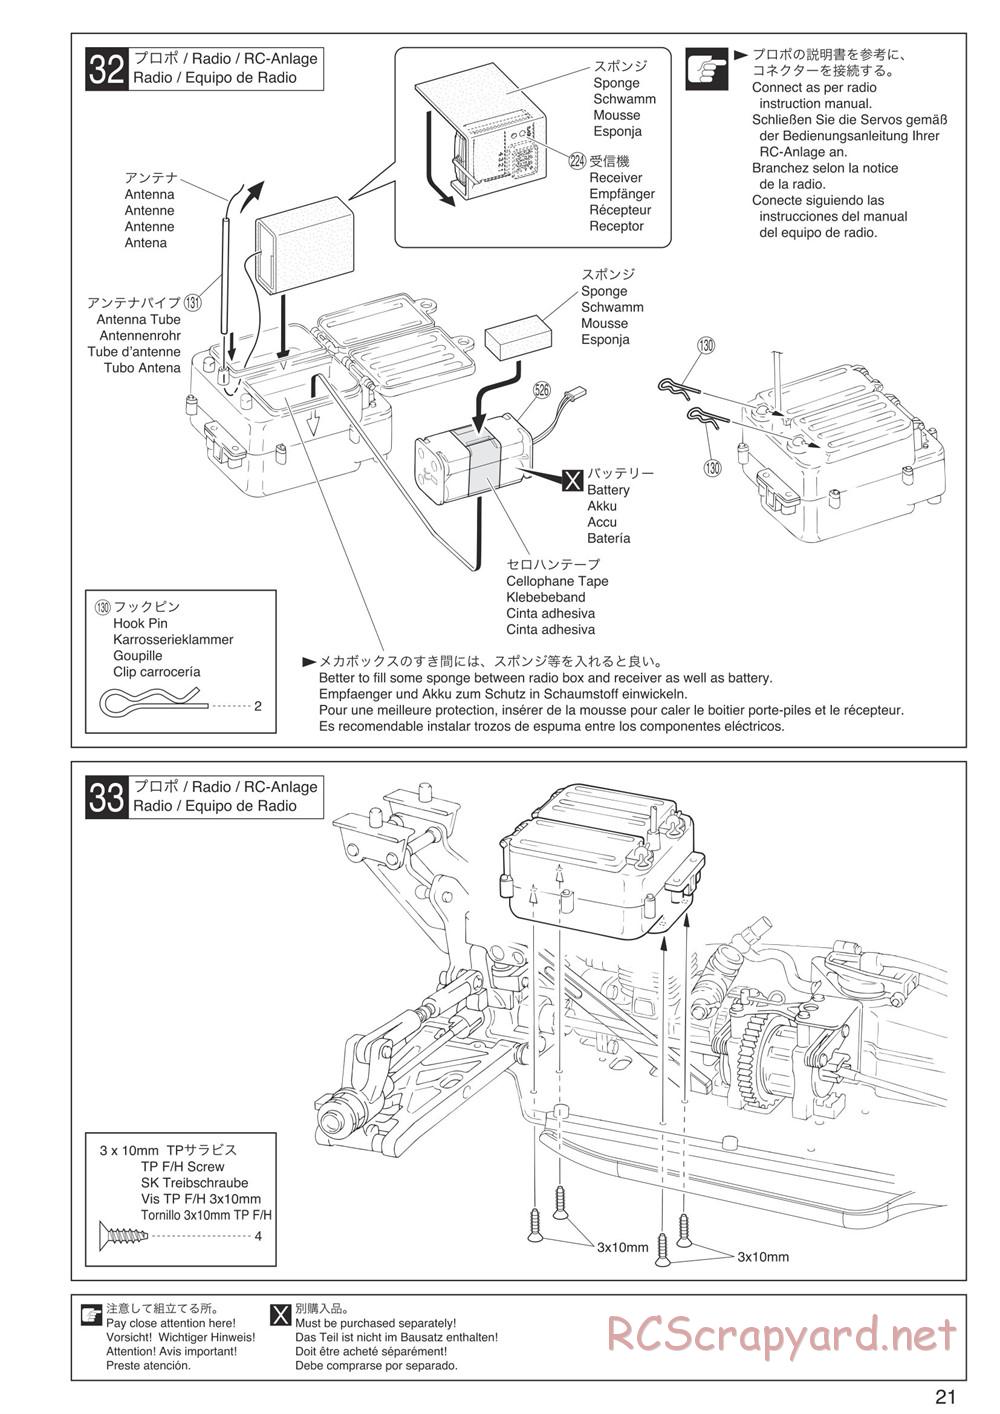 Kyosho - Inferno Neo 3.0 - Manual - Page 21